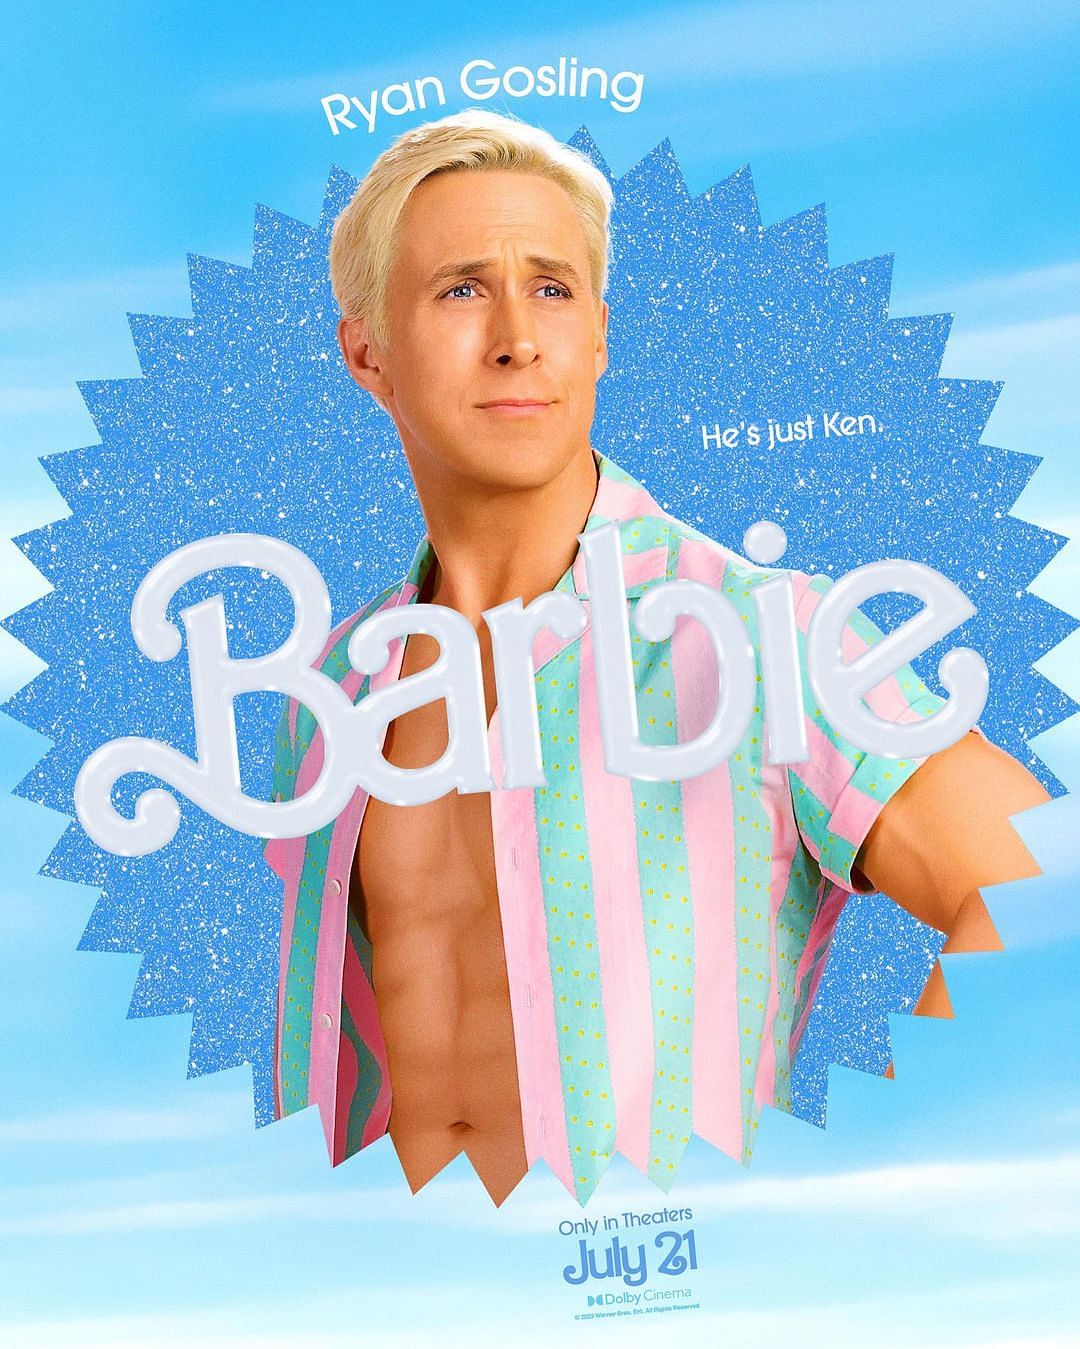 Here are all the actors who play 'Ken' in Greta Gerwig's upcoming film 'Barbie'.